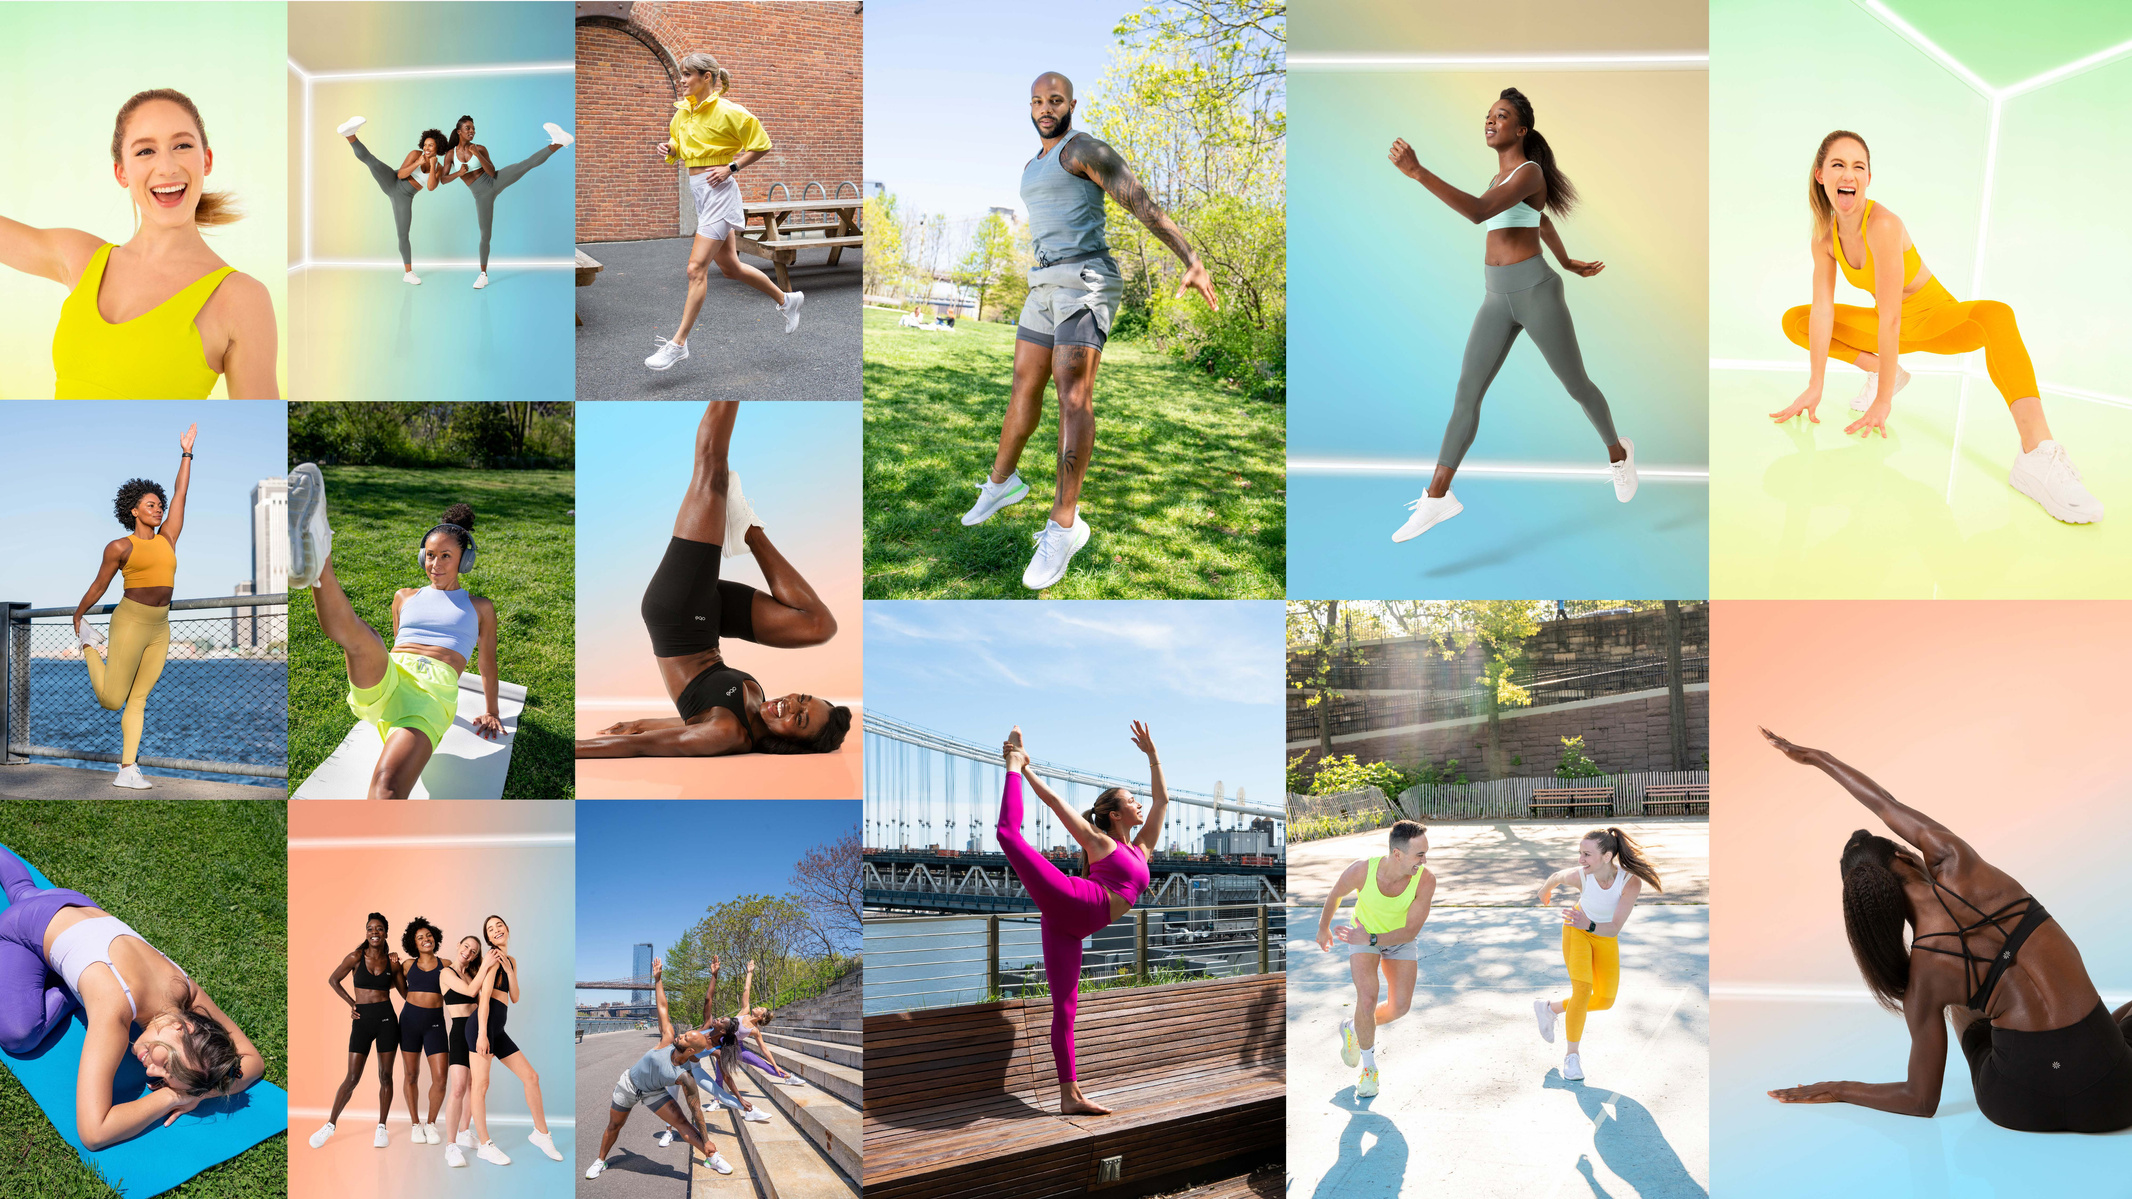 A fitness instructor photography mood board.